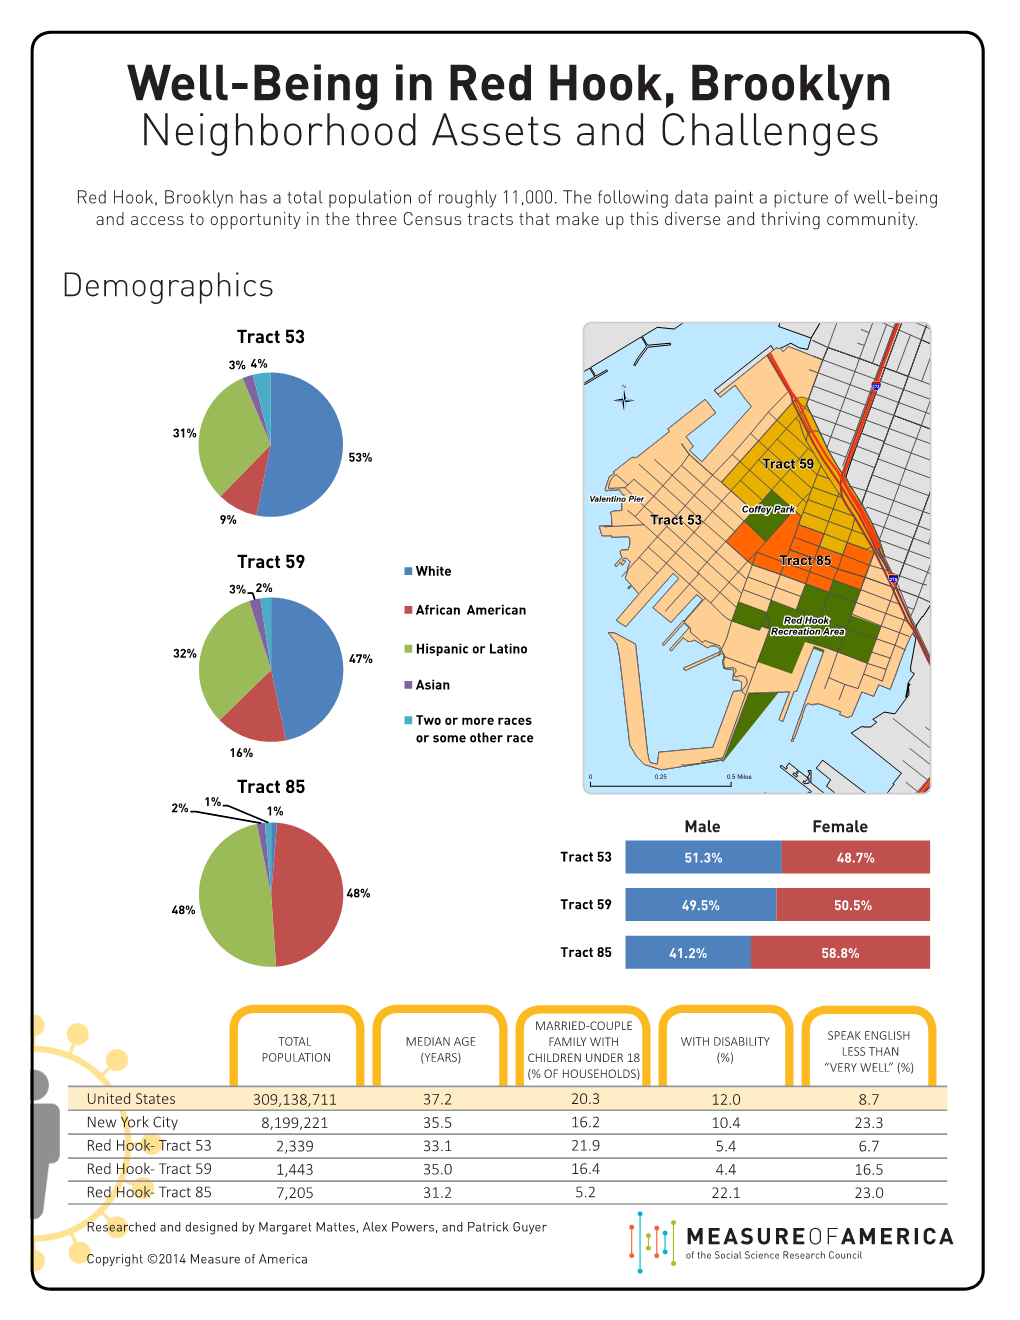 Well-Being in Red Hook, Brooklyn Neighborhood Assets and Challenges